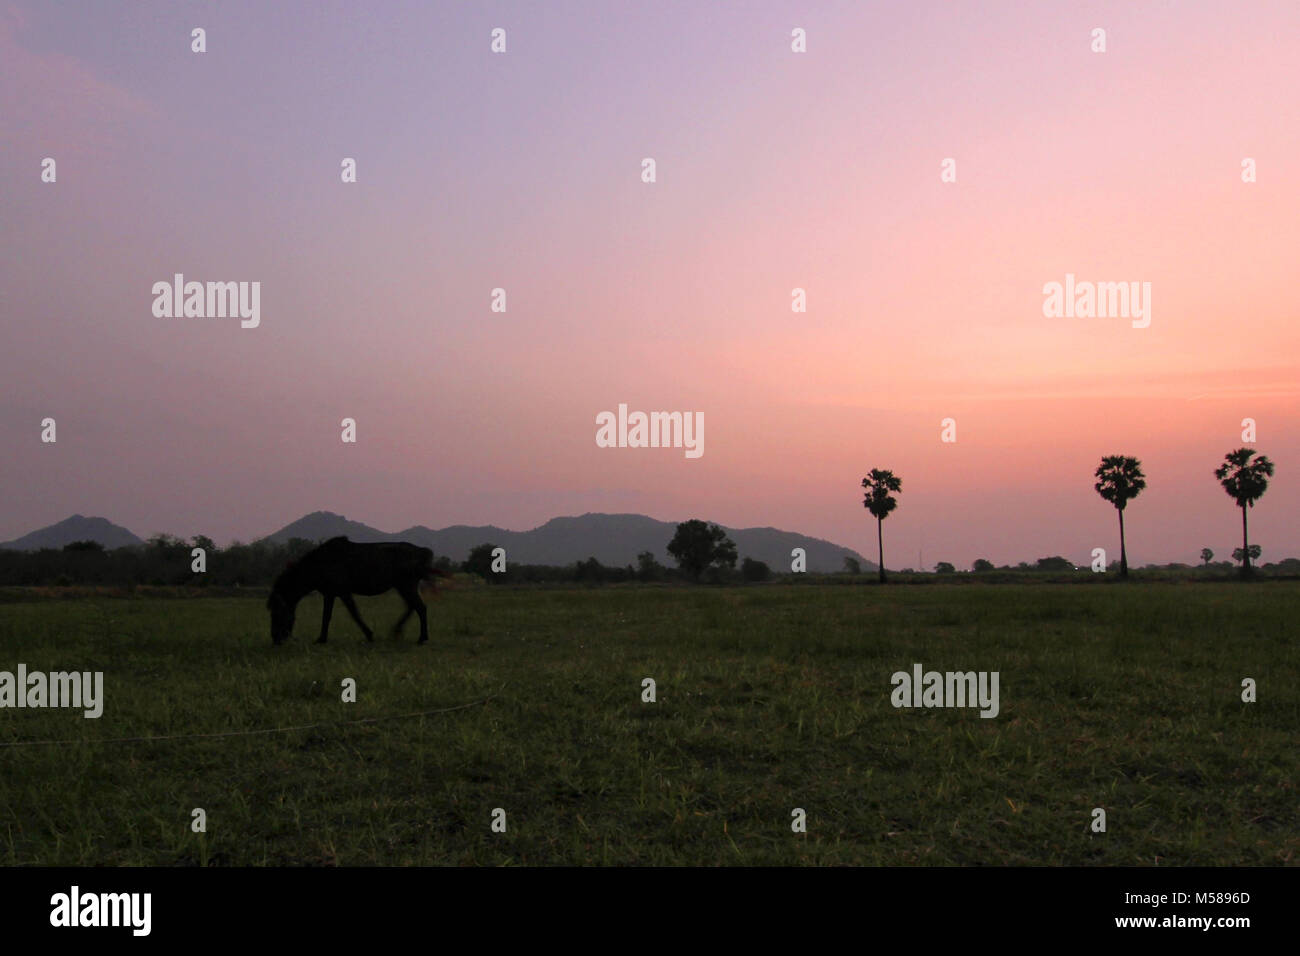 rural landscape at twilight with a horse in a green field Stock Photo